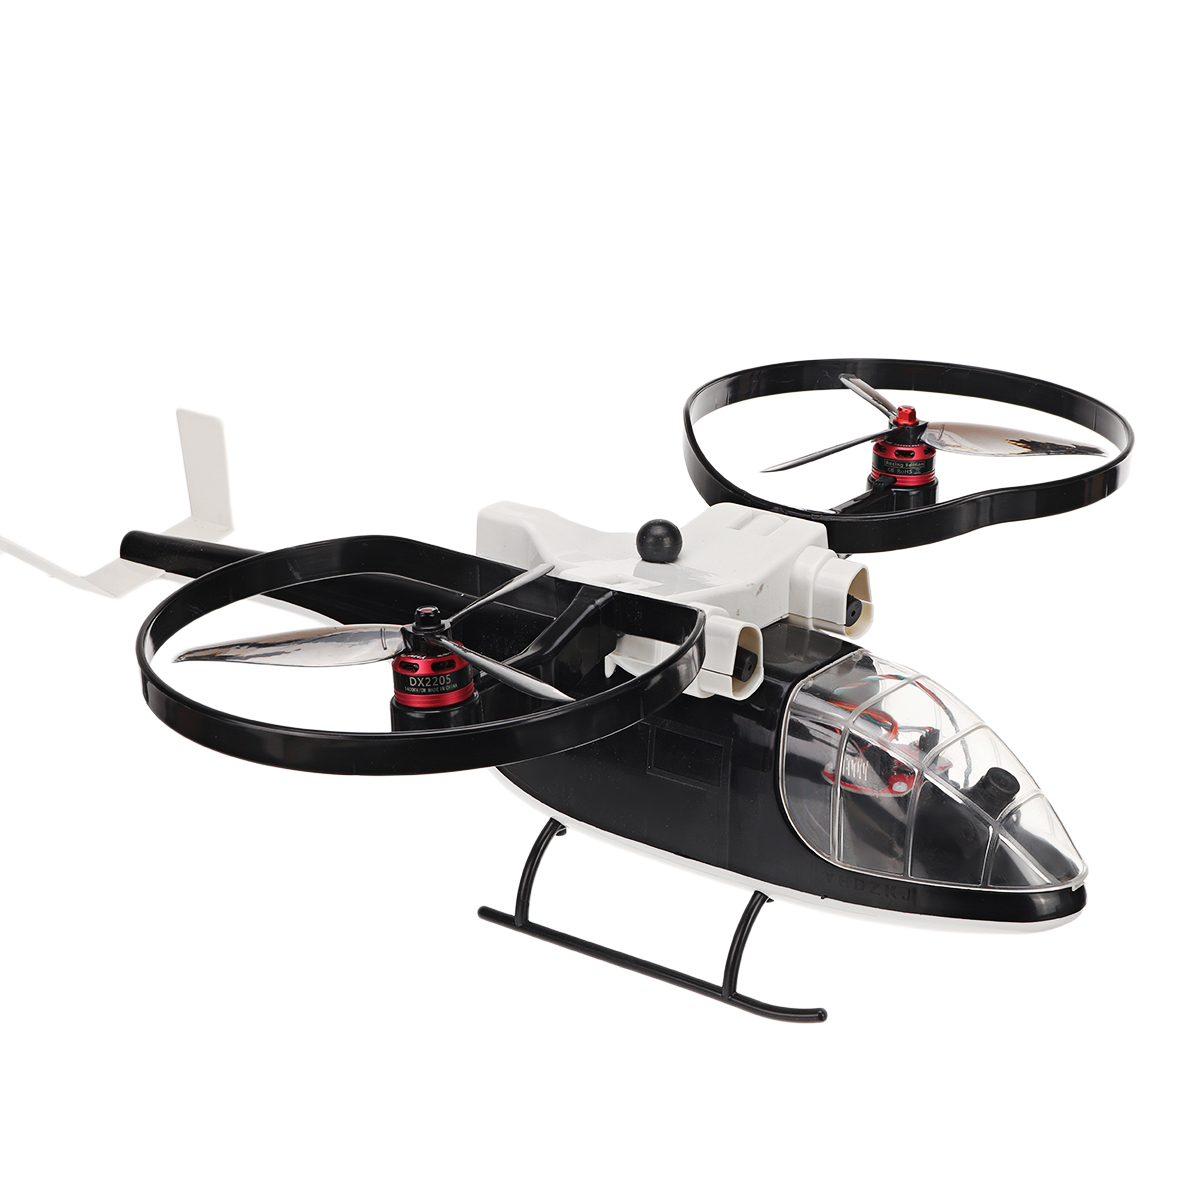 KY-Z2-6CH-Two-axis-Brushless-Helicopter-720P-FPV-RTF-Version-Support-Fixed-point-Fixed-altitude-Flig-1880504-4